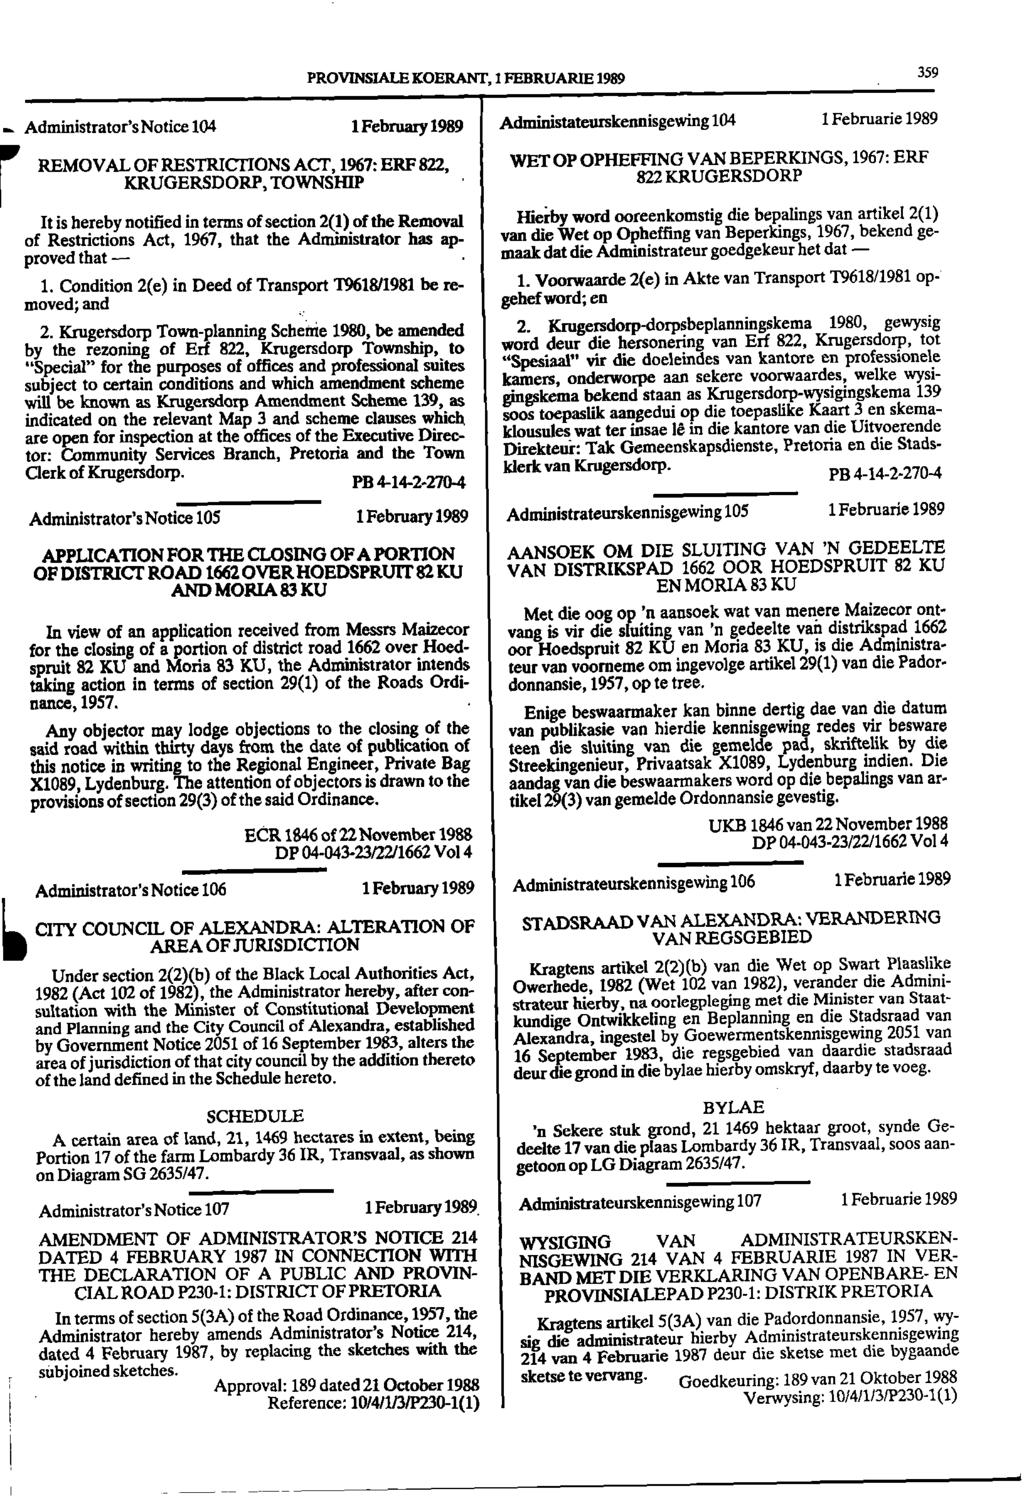 PROVINSIALE KOERANT, 1 FEBRUARIE 1989 359 Administrator's Notice 104 1February 1989 Administateurskennisgewing 104 1 Februarie 1989 6 CITY REMOVAL OF RESTRICTIONS ACT, 1967: ERF 822, KRUGERSDORP,